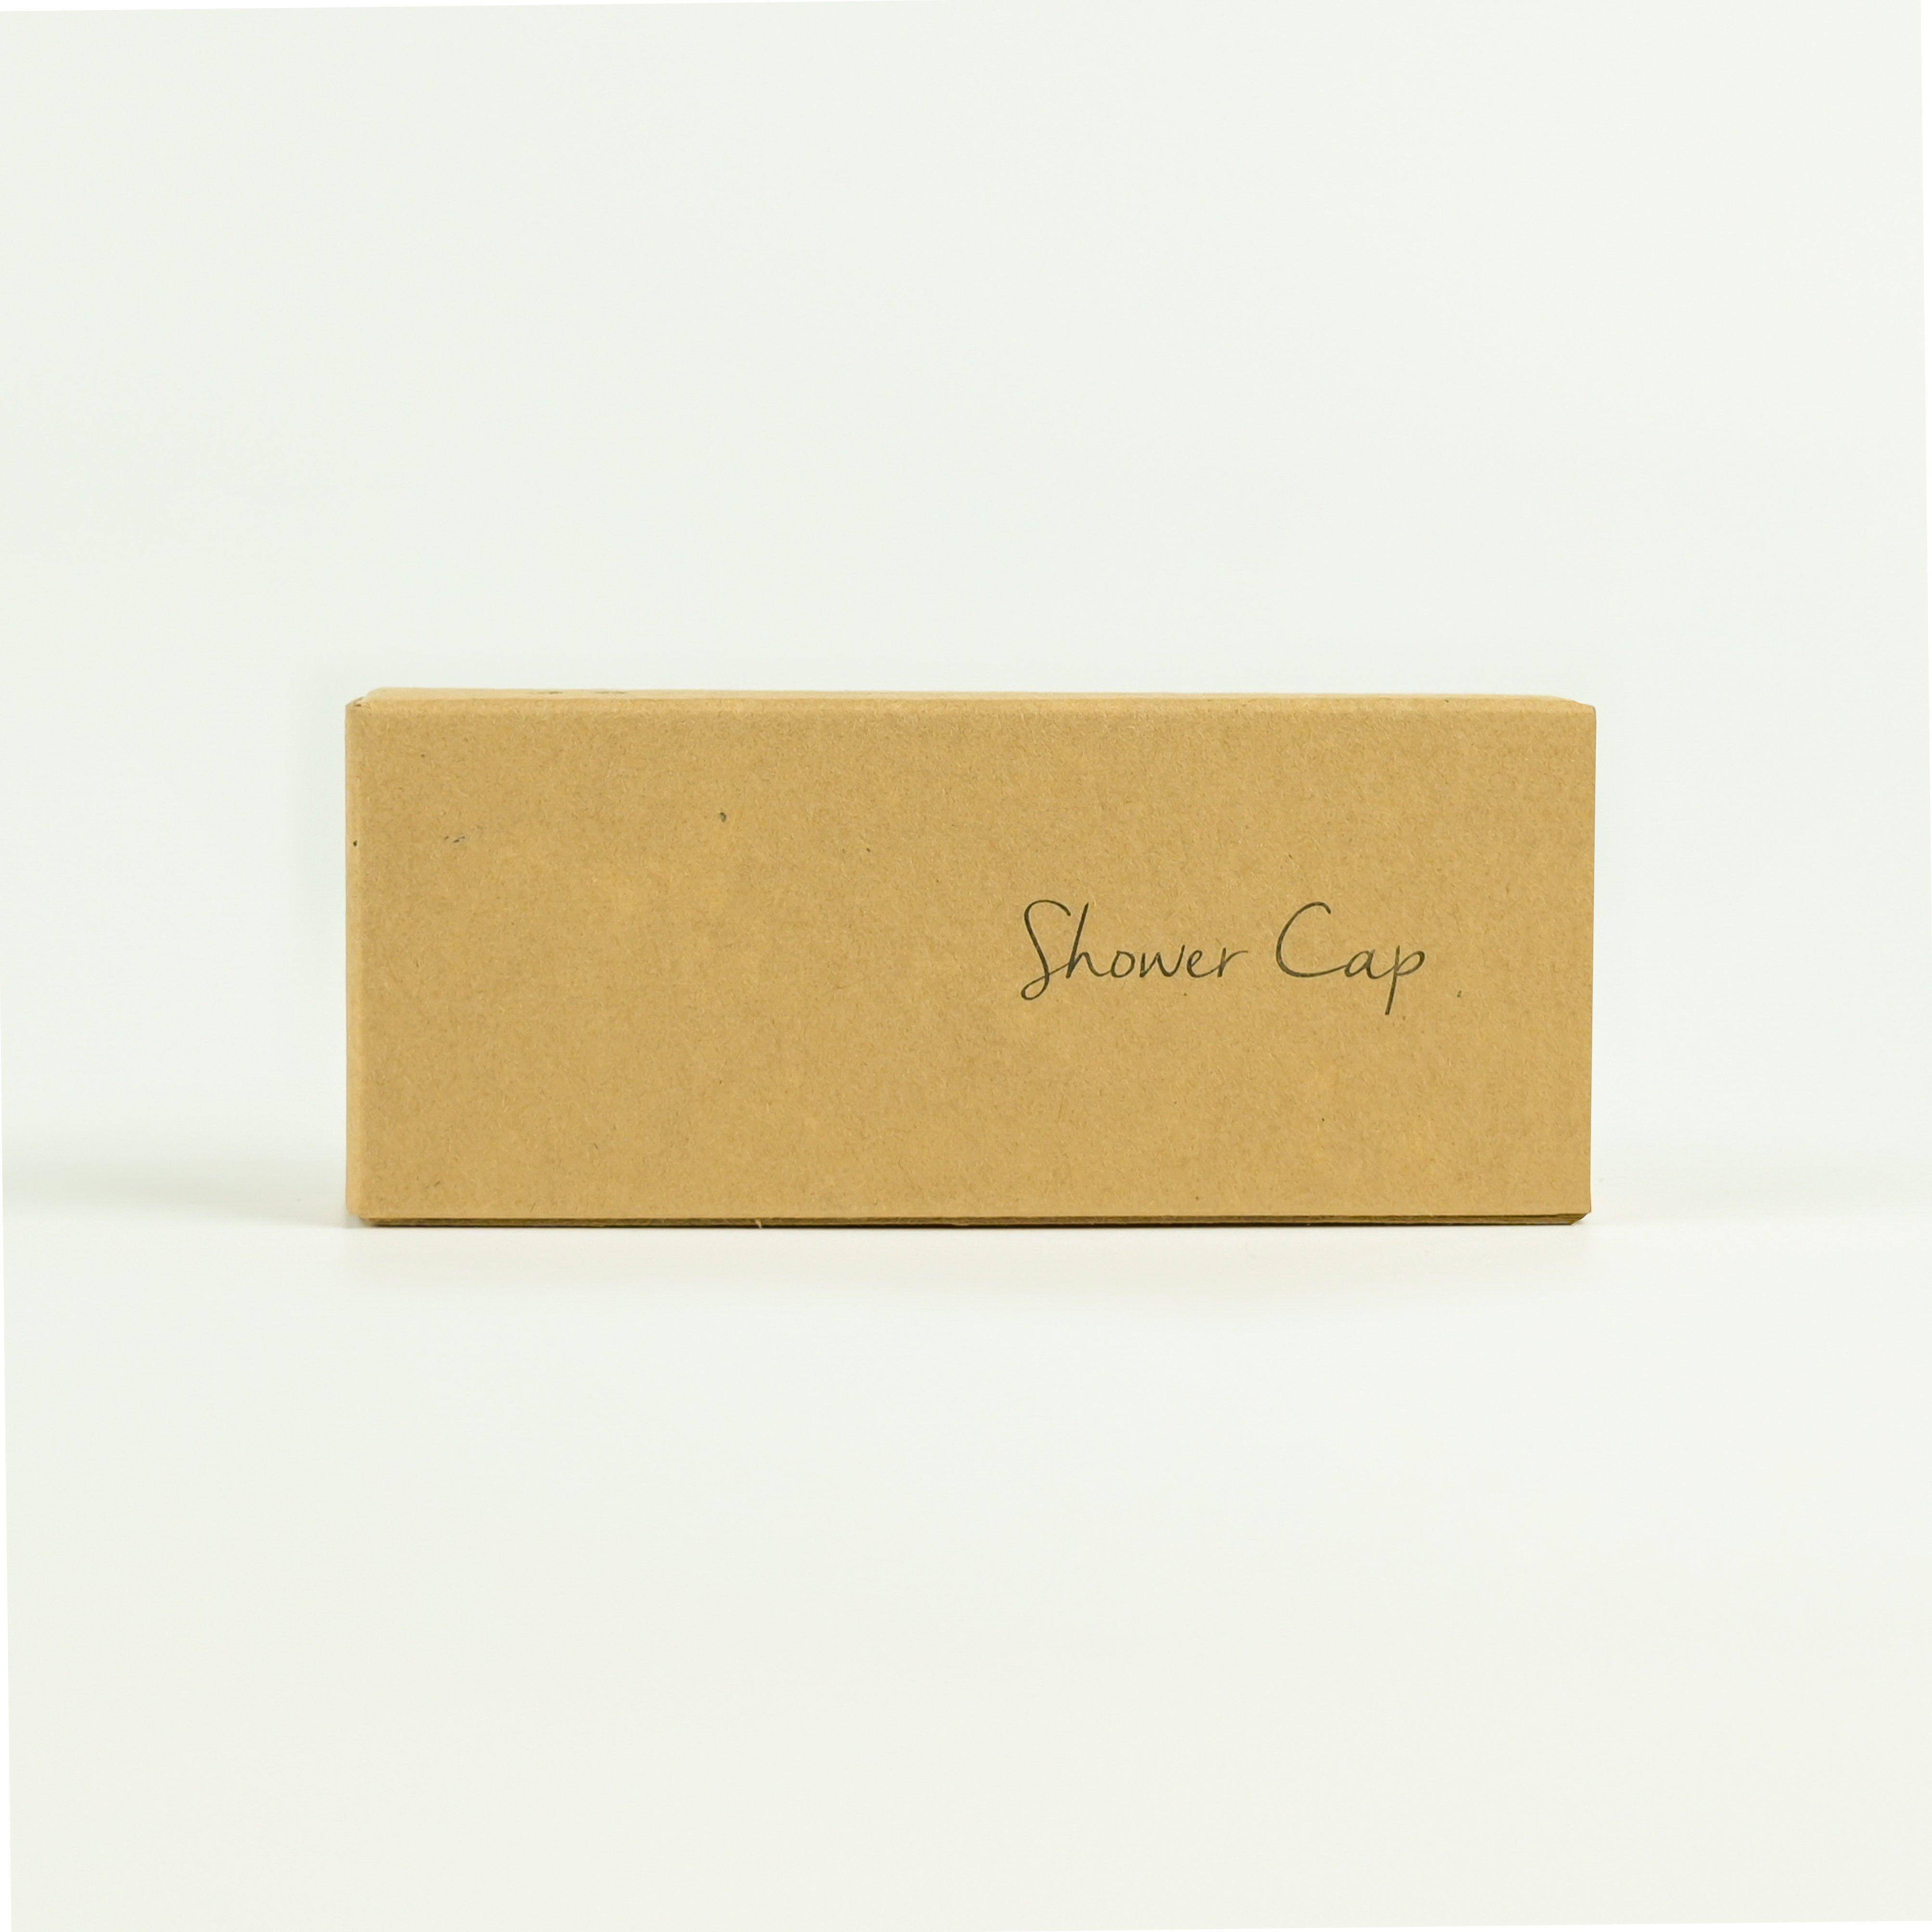 Disposable Shower Cap in Recycled Kraft Box - Image 1